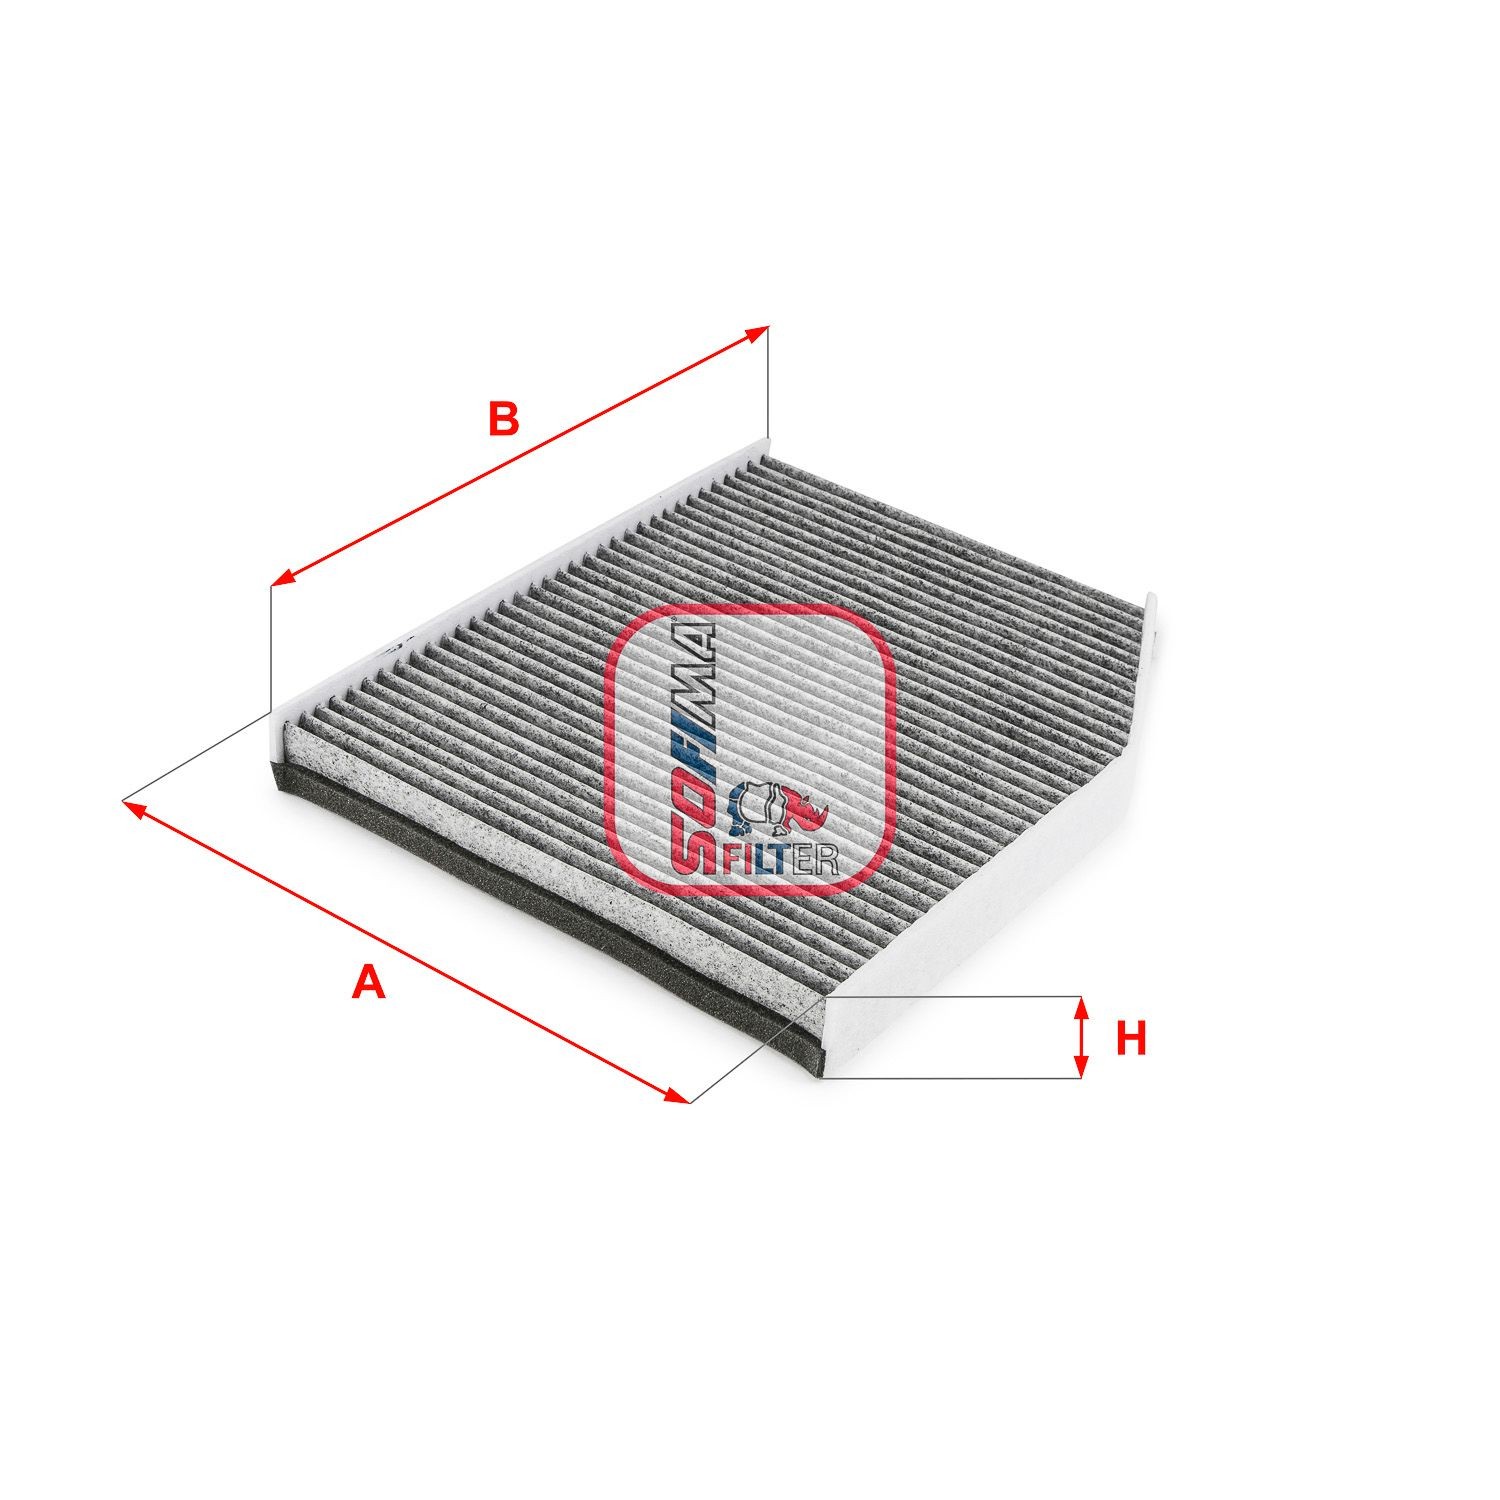 SOFIMA Activated Carbon Filter, 290 mm x 233 mm x 30 mm Width: 233mm, Height: 30mm, Length: 290mm Cabin filter S 4261 CA buy